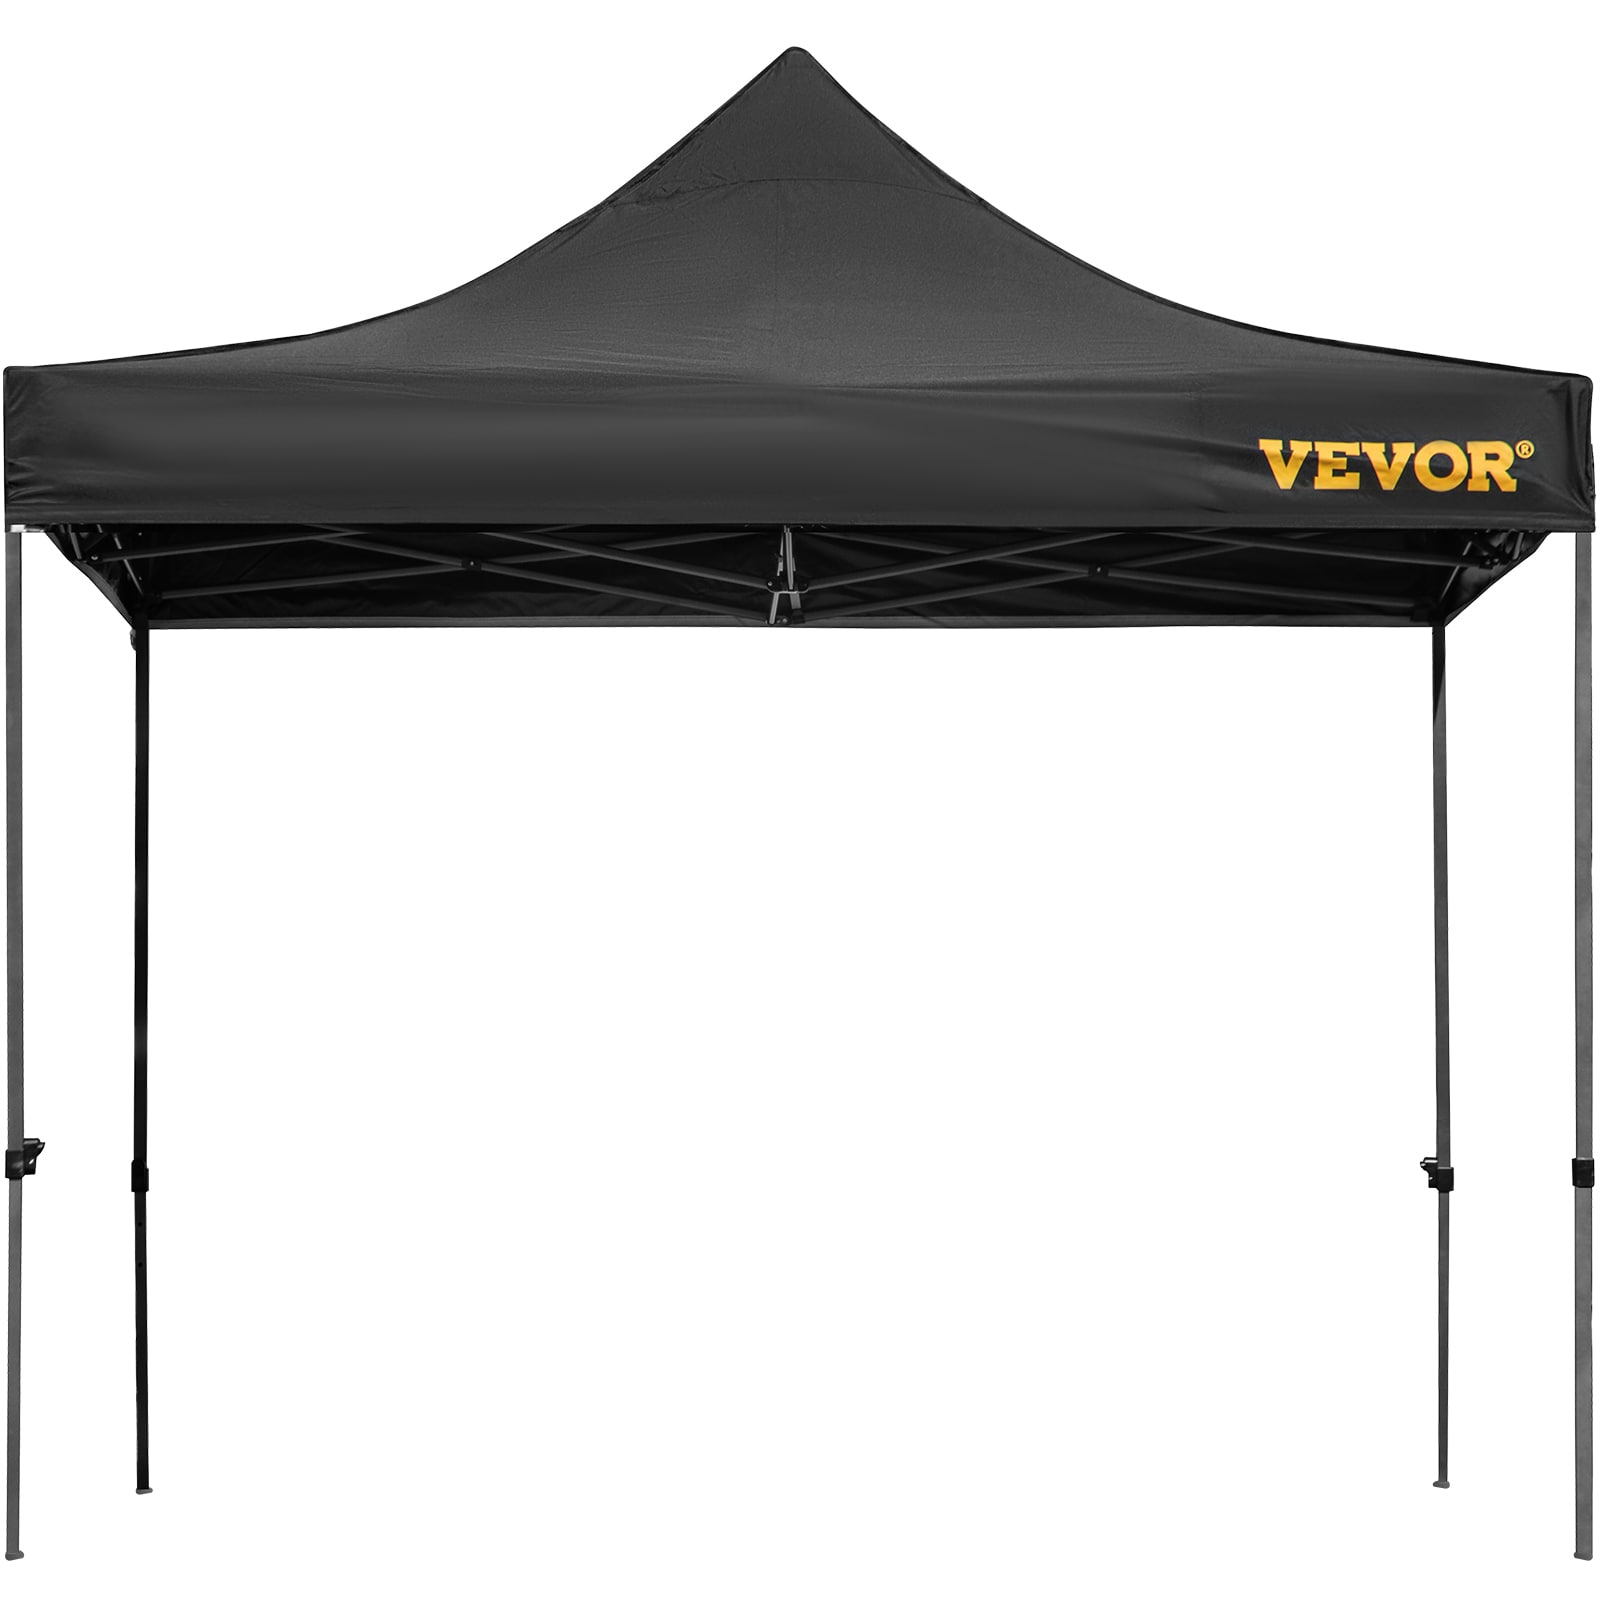 VEVOR Pop Up Canopy Tent, 10 x 10 ft, Outdoor Patio Gazebo Tent with Removable Sidewalls and Wheeled Bag, UV Resistant Waterproof Instant Gazebo